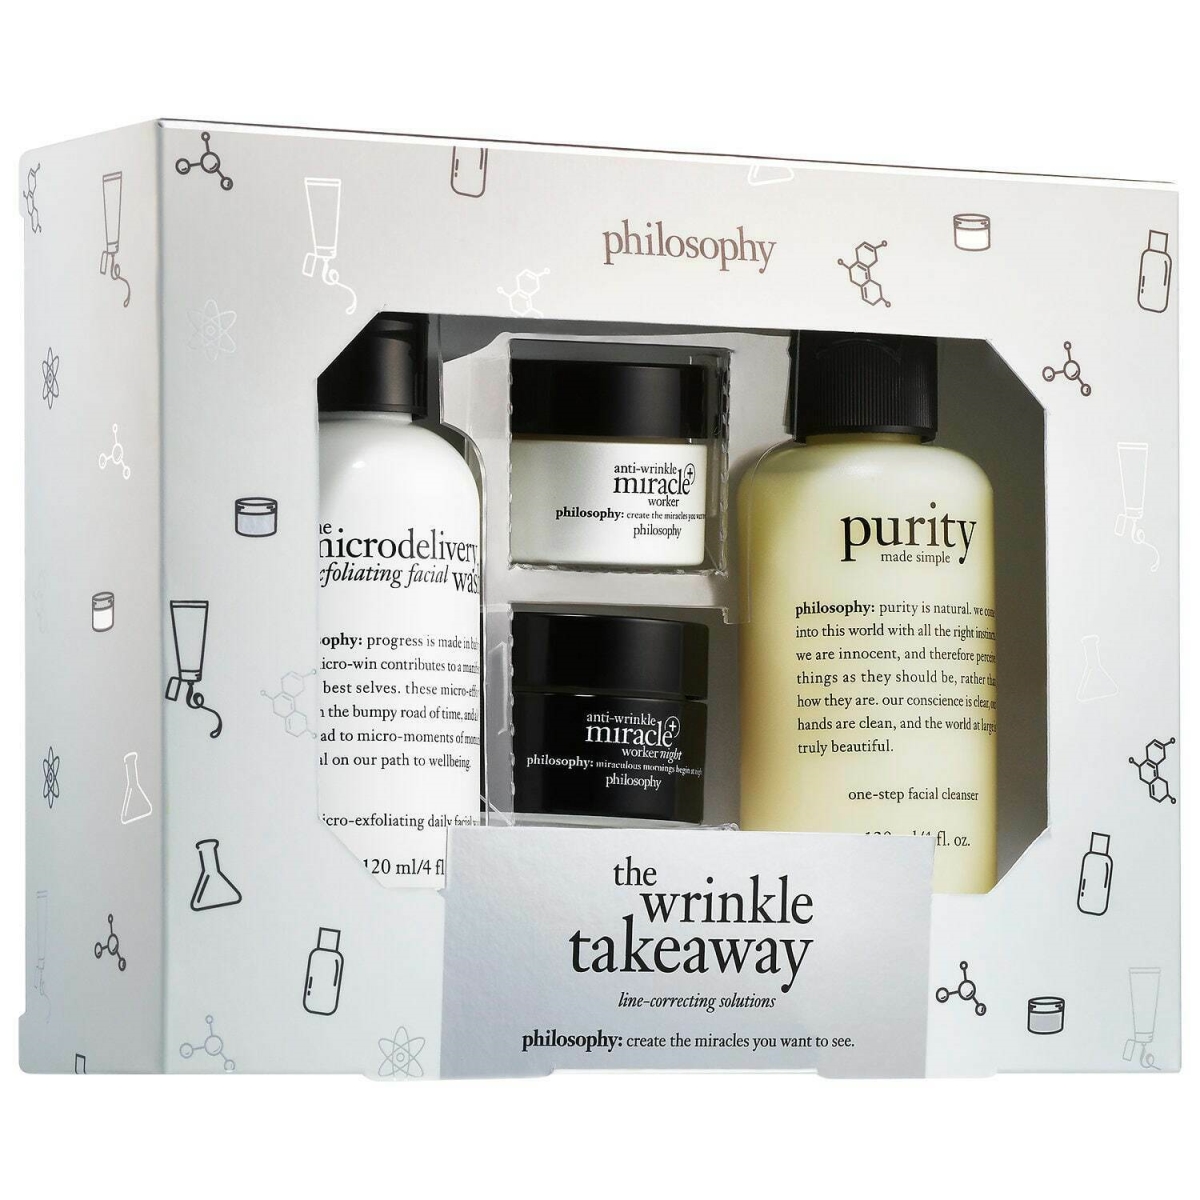 I0094540 4 Oz The Wrinkle Takeaway Facial Cleanser Kit For Unisex - 4 Piece